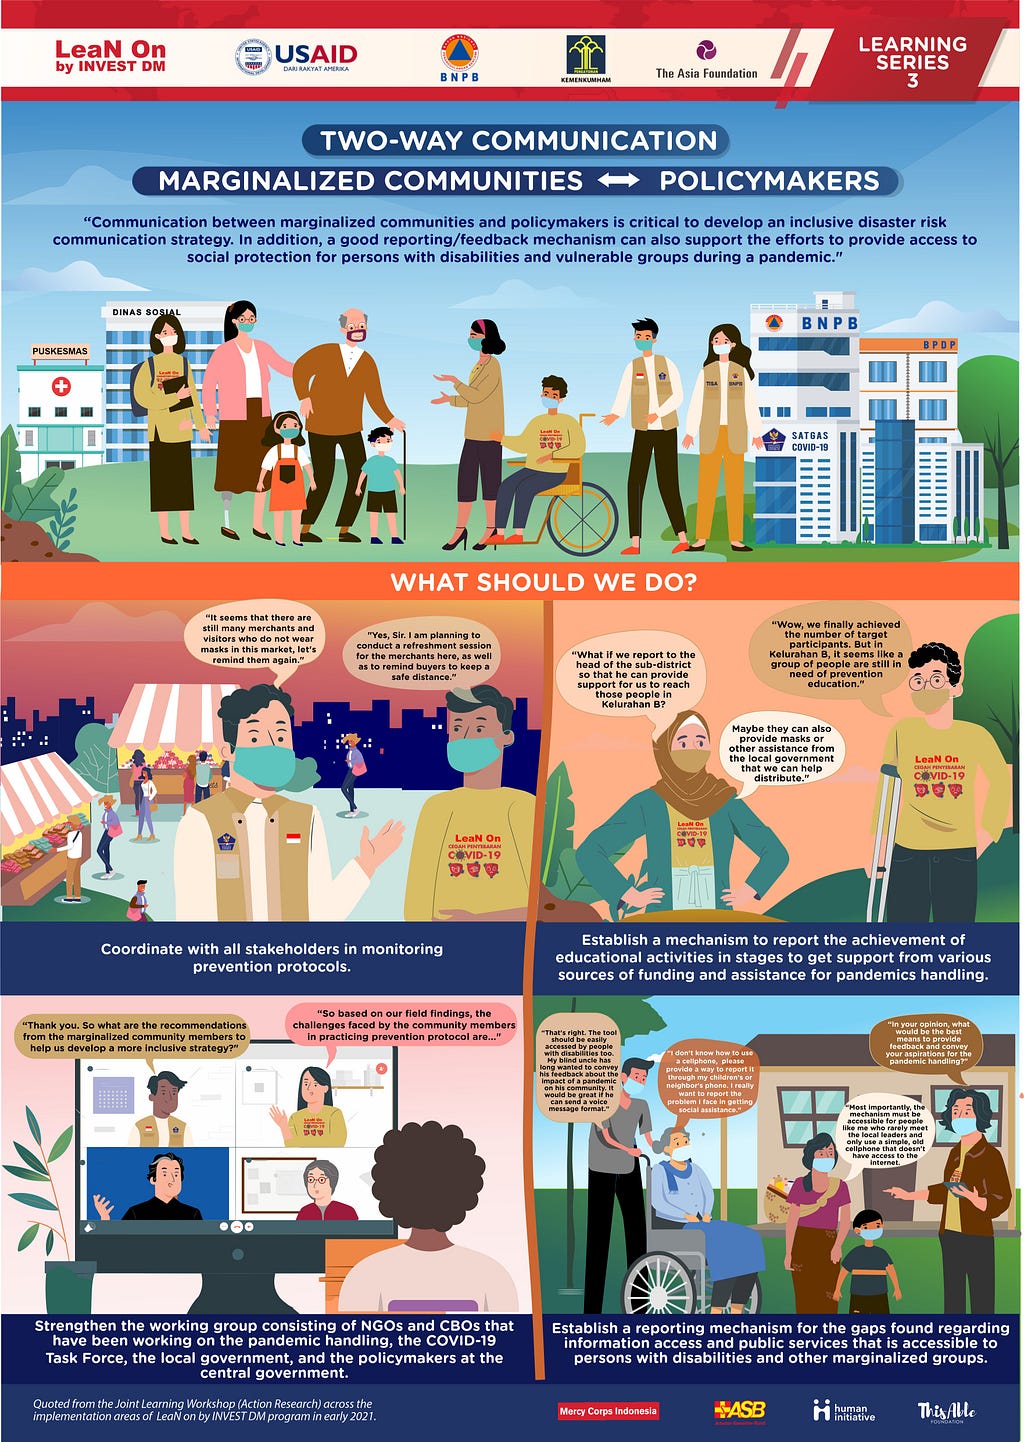 This infographic illustrates the importance of two-way communication access between marginalized groups and policymakers for a more effective and inclusive pandemic response strategy. An audio version of the infographic will be added to this page soon.